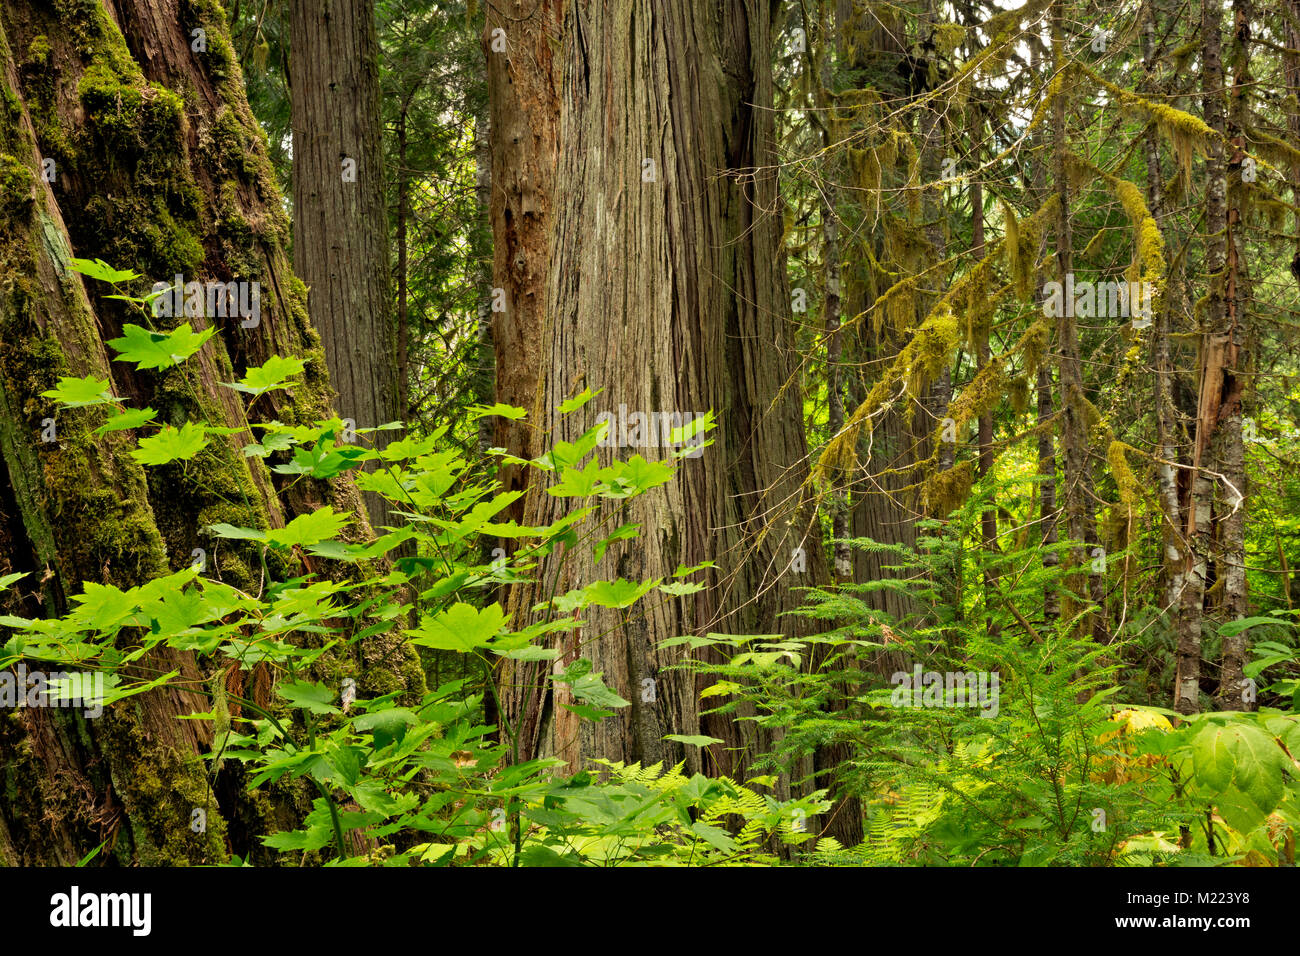 WA13220-00...WASHINGTON - Giant Western Red Cedar trees growing among the vine maple and devils club in the Big Beaver Valley section of the Pacific N Stock Photo